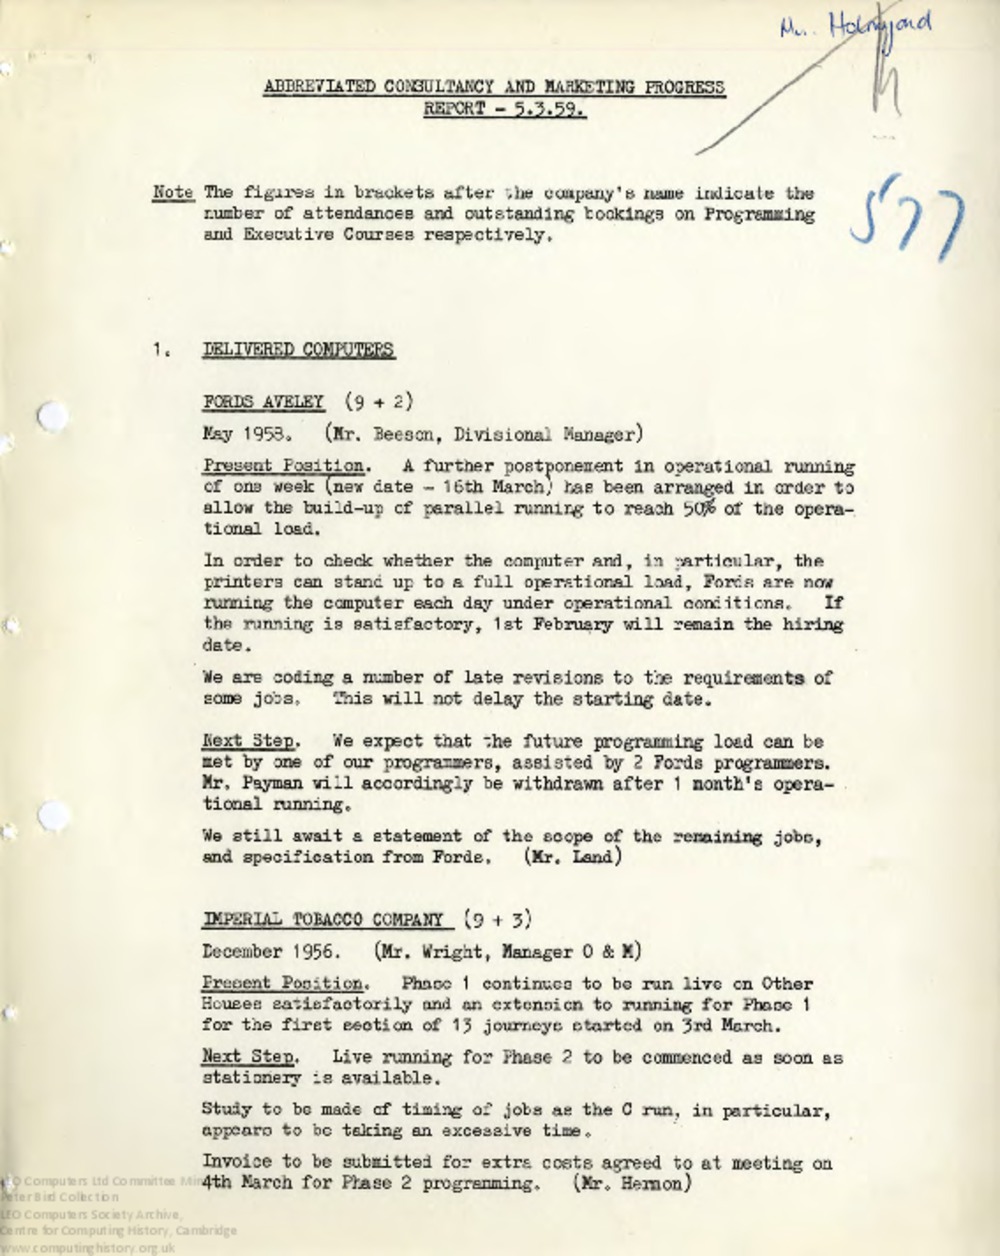 Article: 64472 Abbreviated Consultancy and Marketing Progress Report and Minutes, 5th Mar 1959